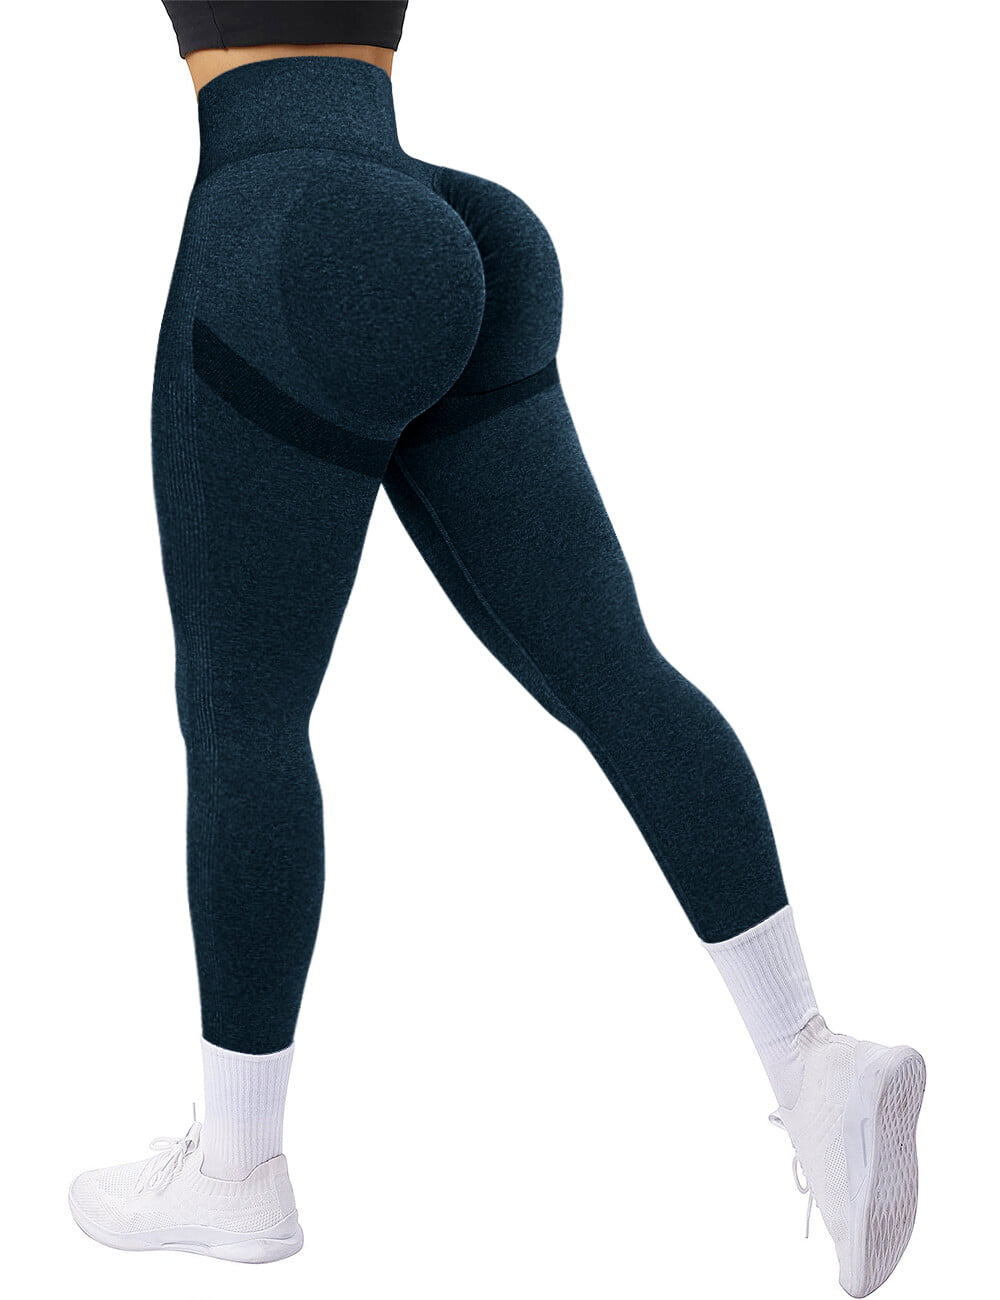 A AGROSTE Scrunch Butt Lifting Seamless Leggings Booty High Waisted Workout  Yoga Pants Anti-Cellulite Scrunch Pants Black-L 